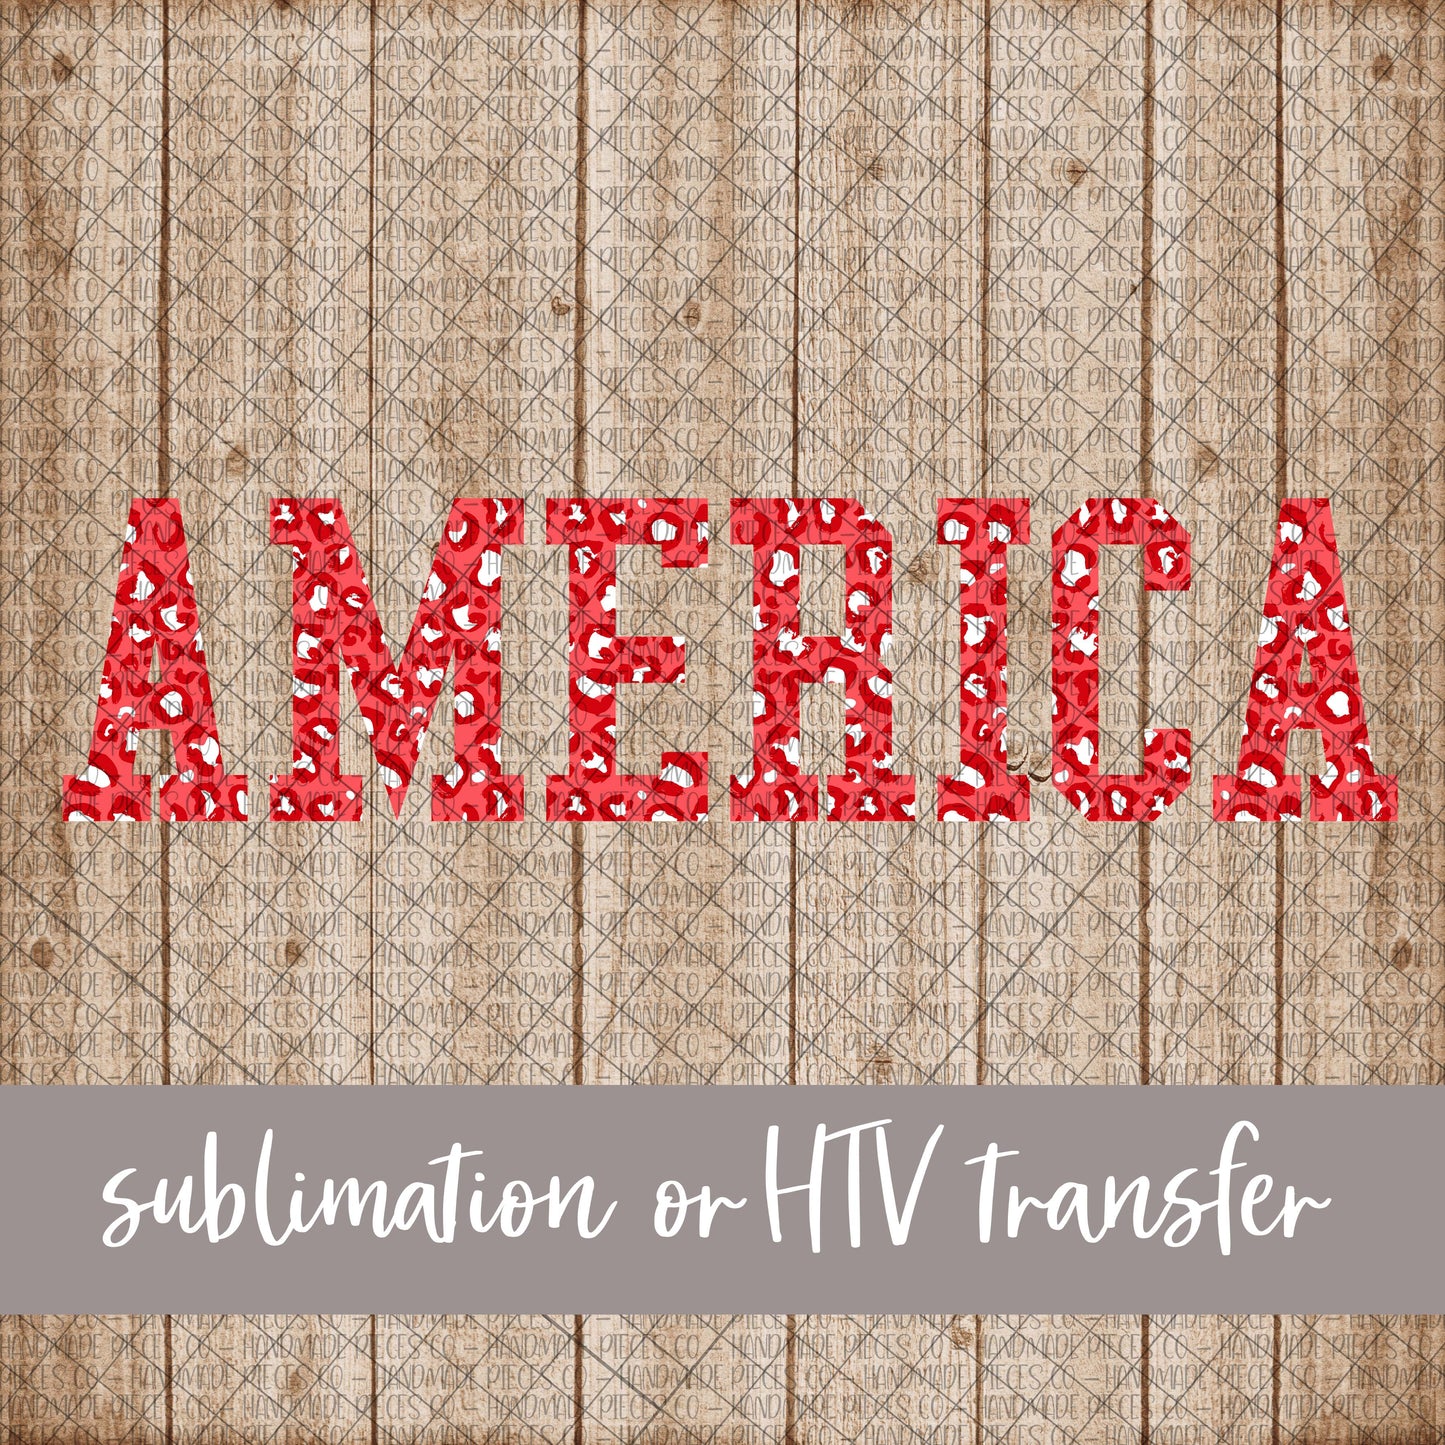 America, Leopard Red - Sublimation or HTV Transfer